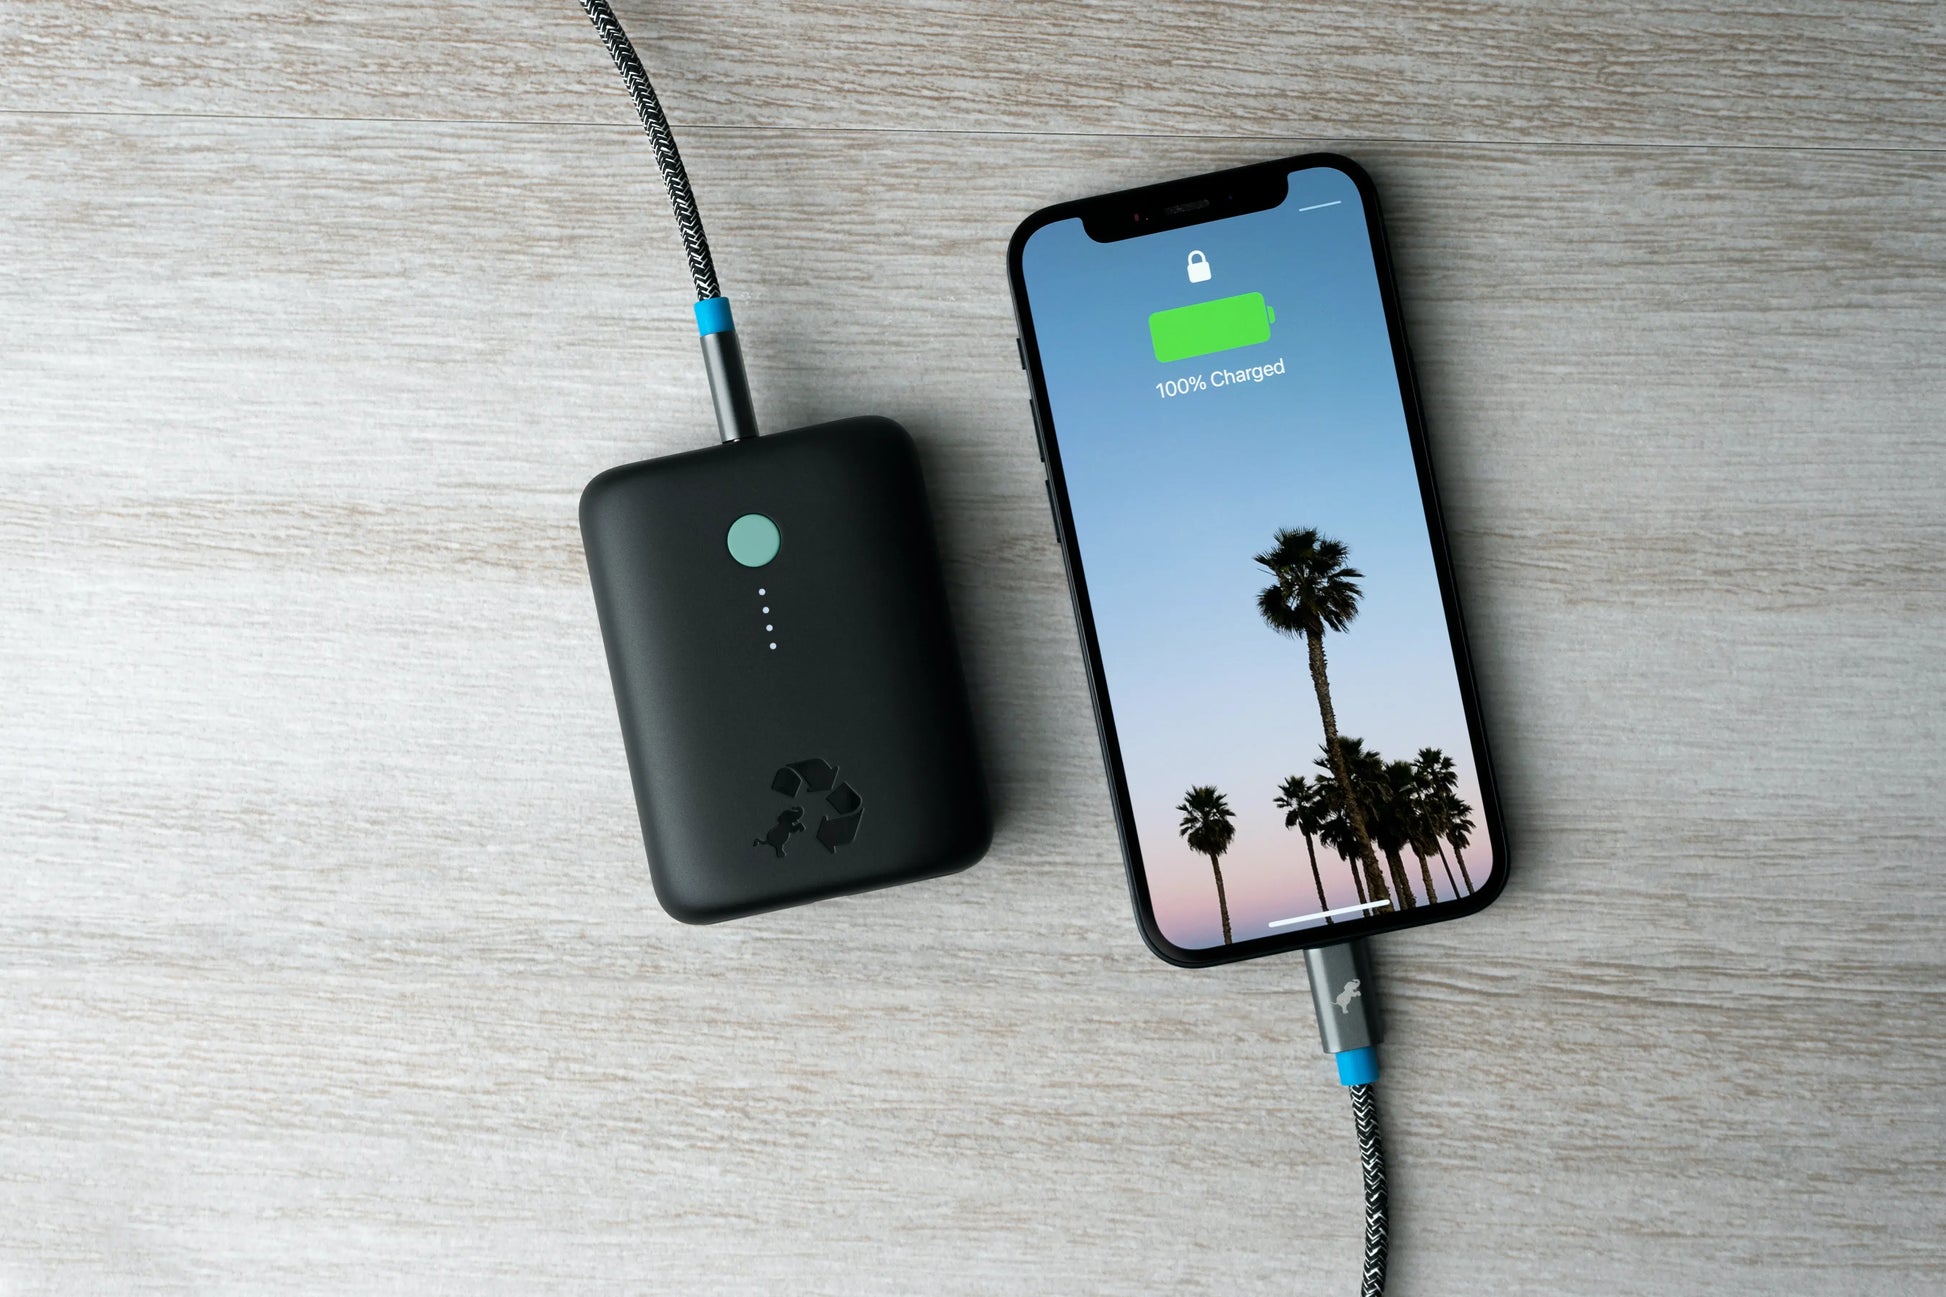 Black portable charger with green button connected to cell phone on table.